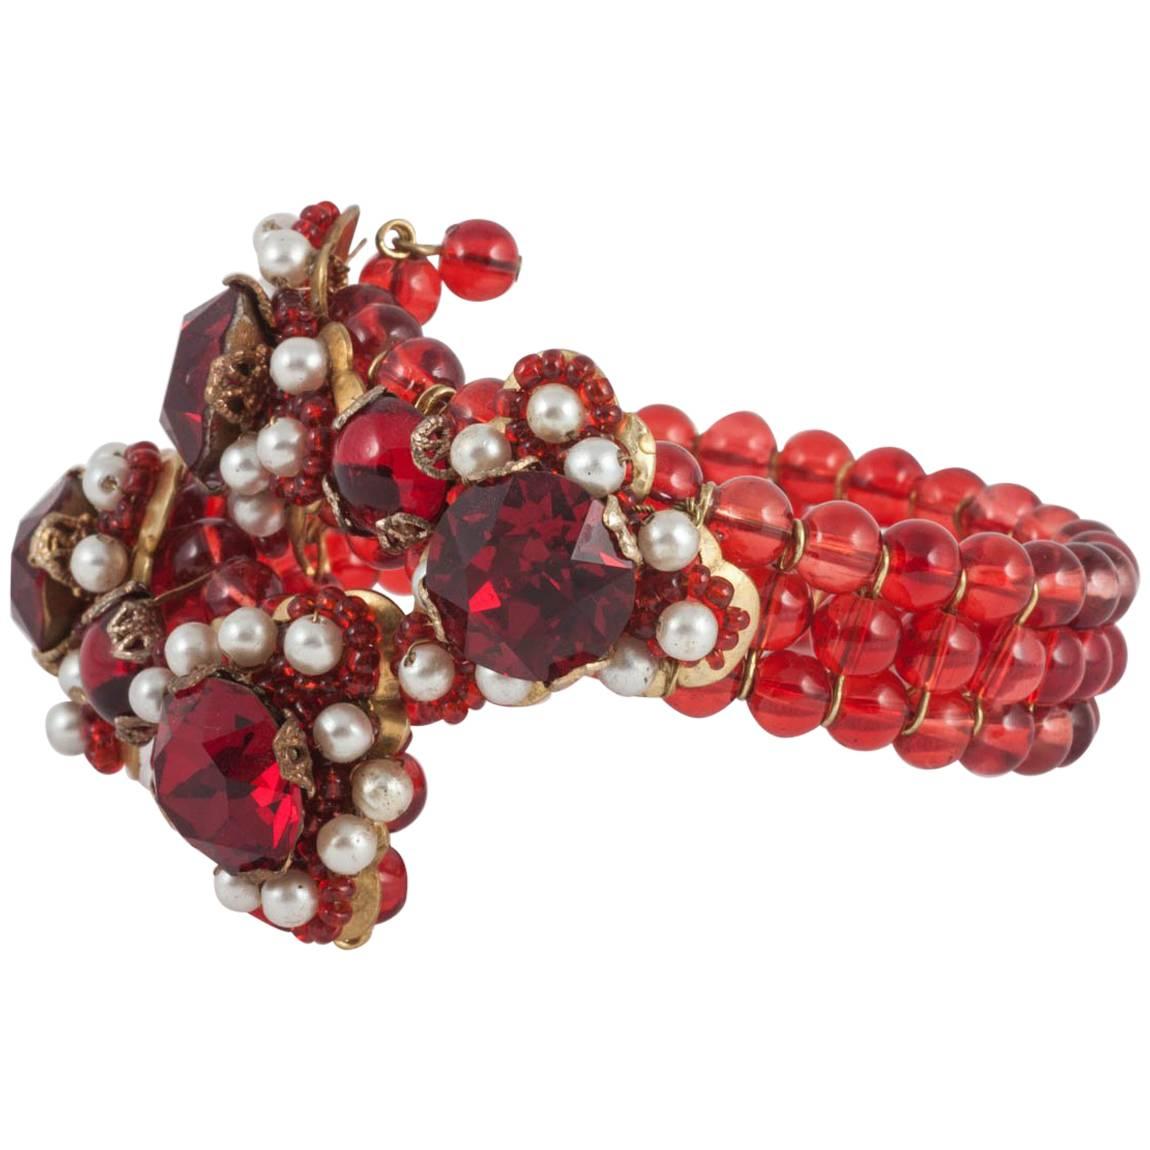 Ruby red glass bead and pearl bracelet in the style of Miriam Haskell